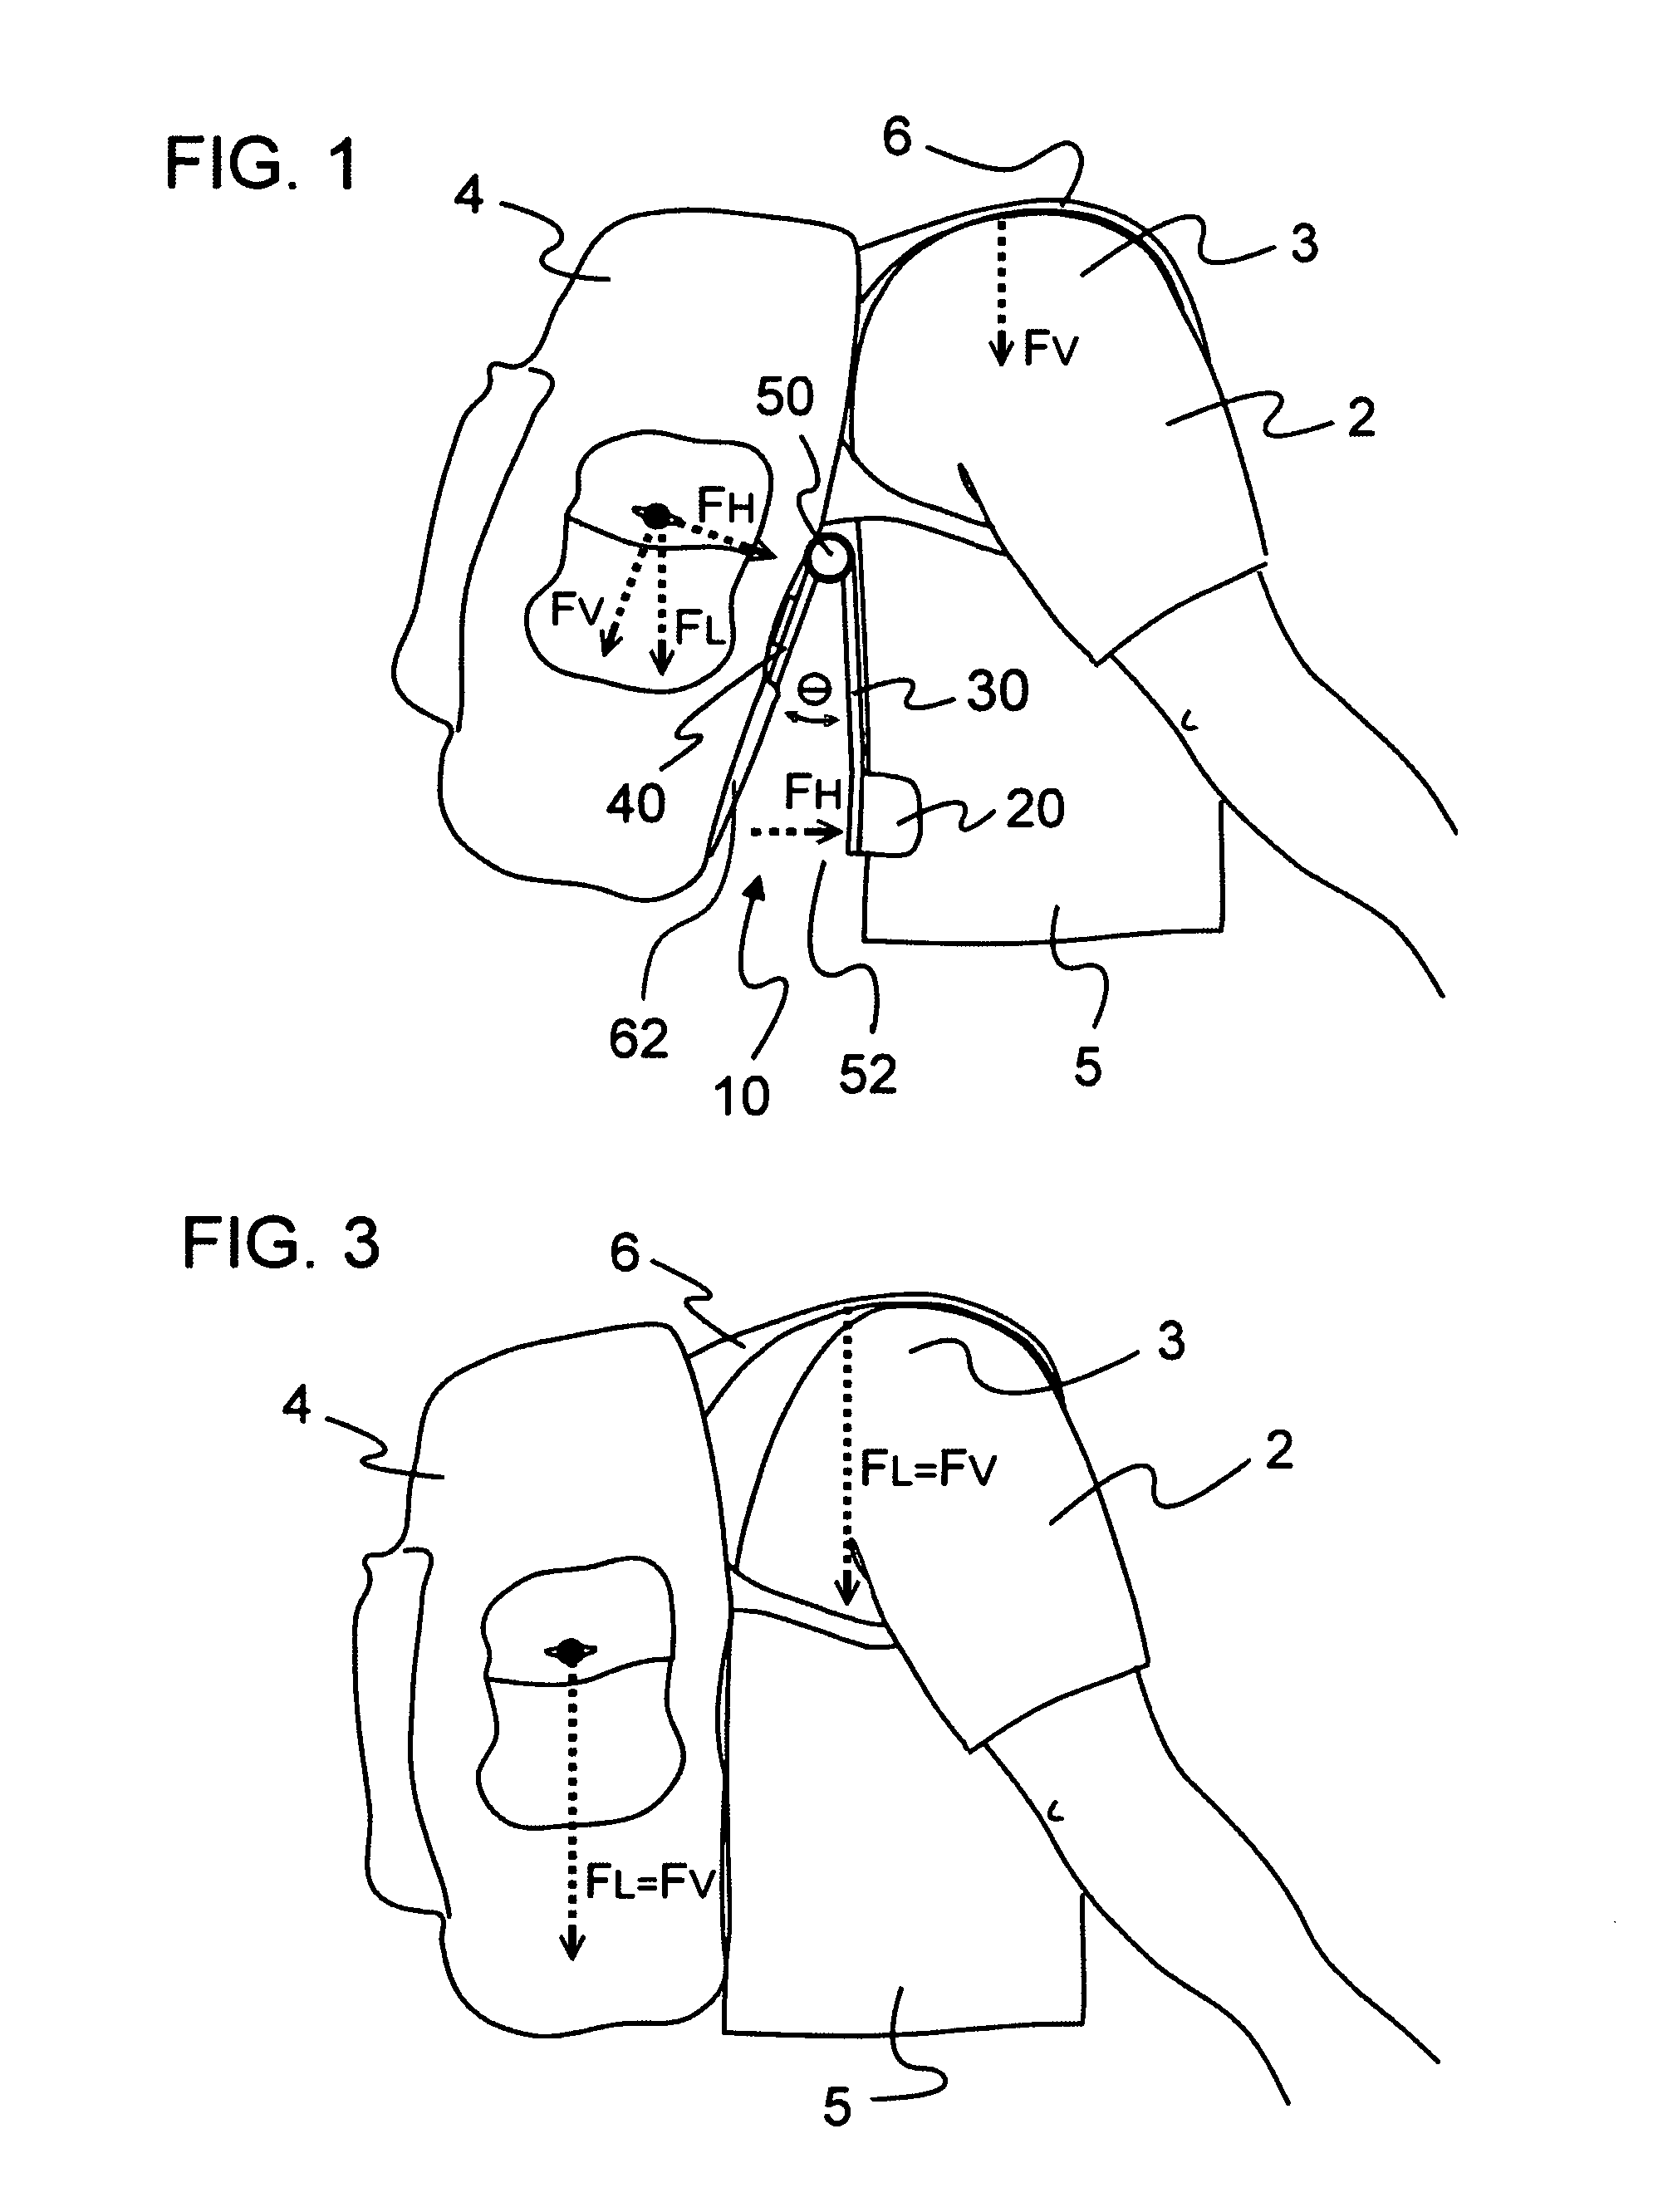 Backpack load carrying system